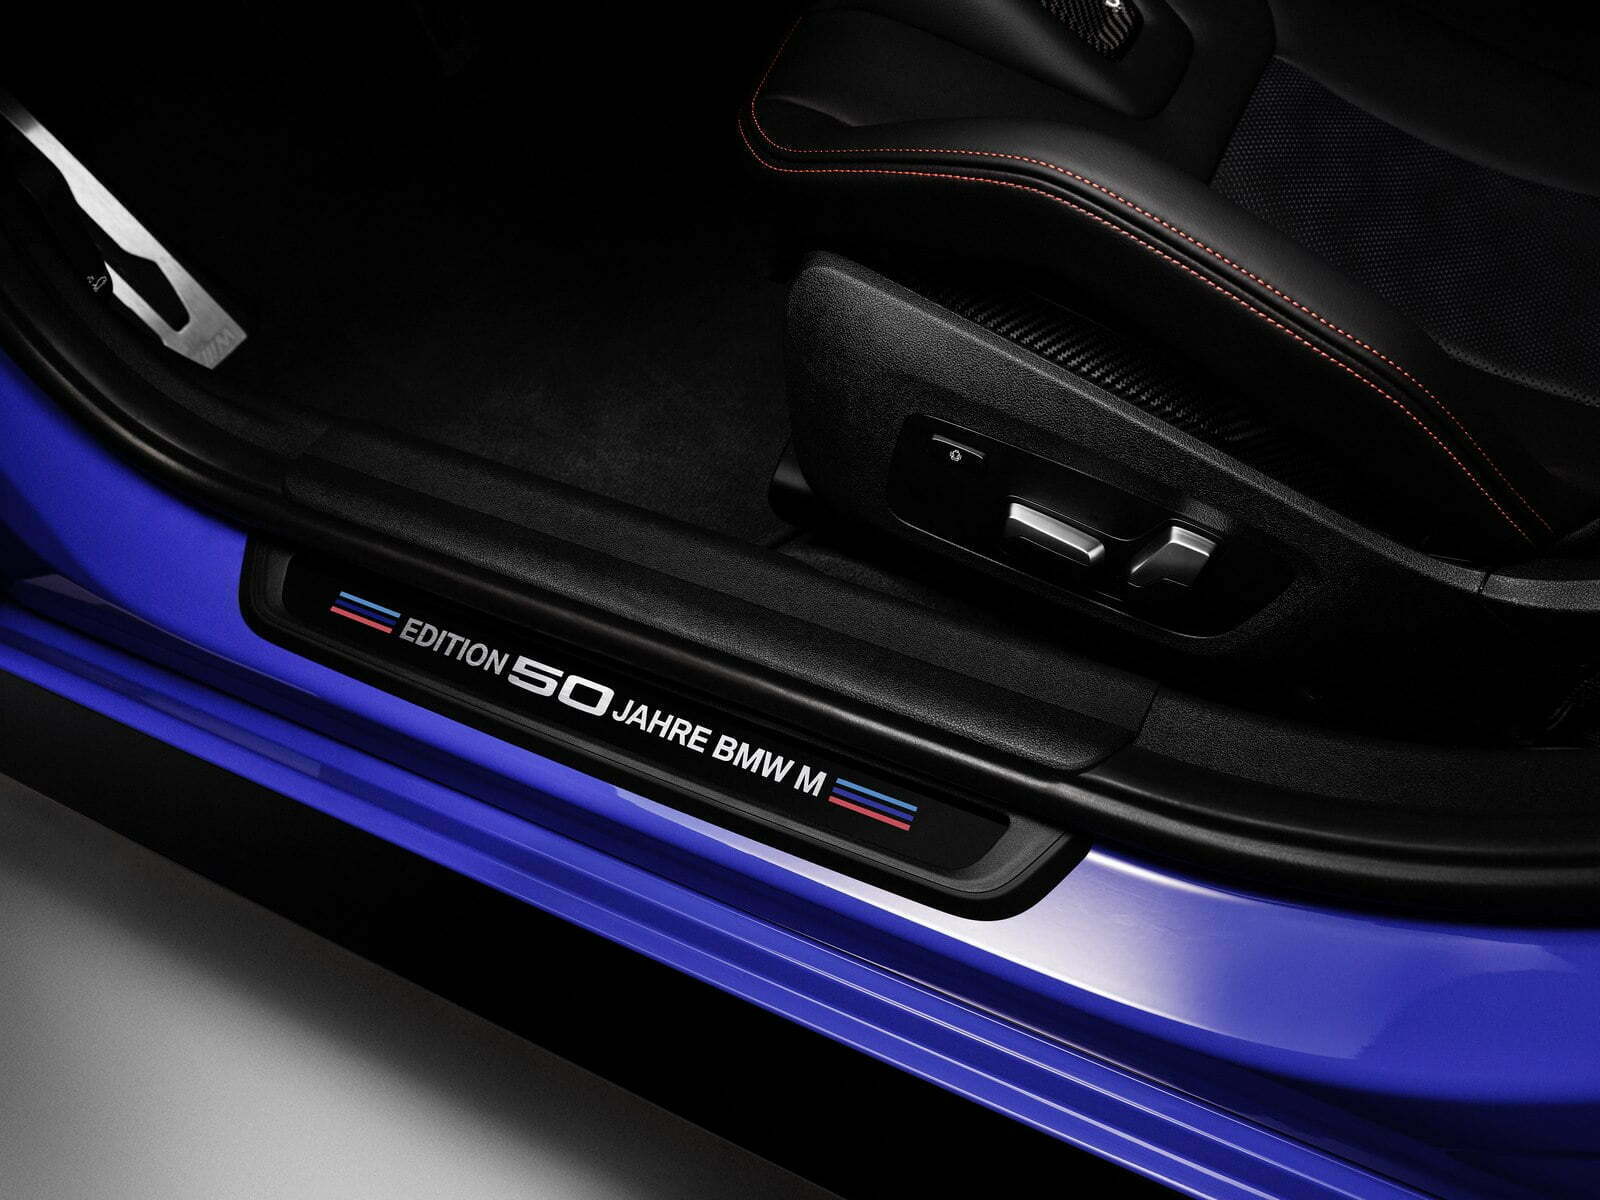 50 Years Of M! BMW M3 and M4 Jahre Limited Edition Revealed! (4)